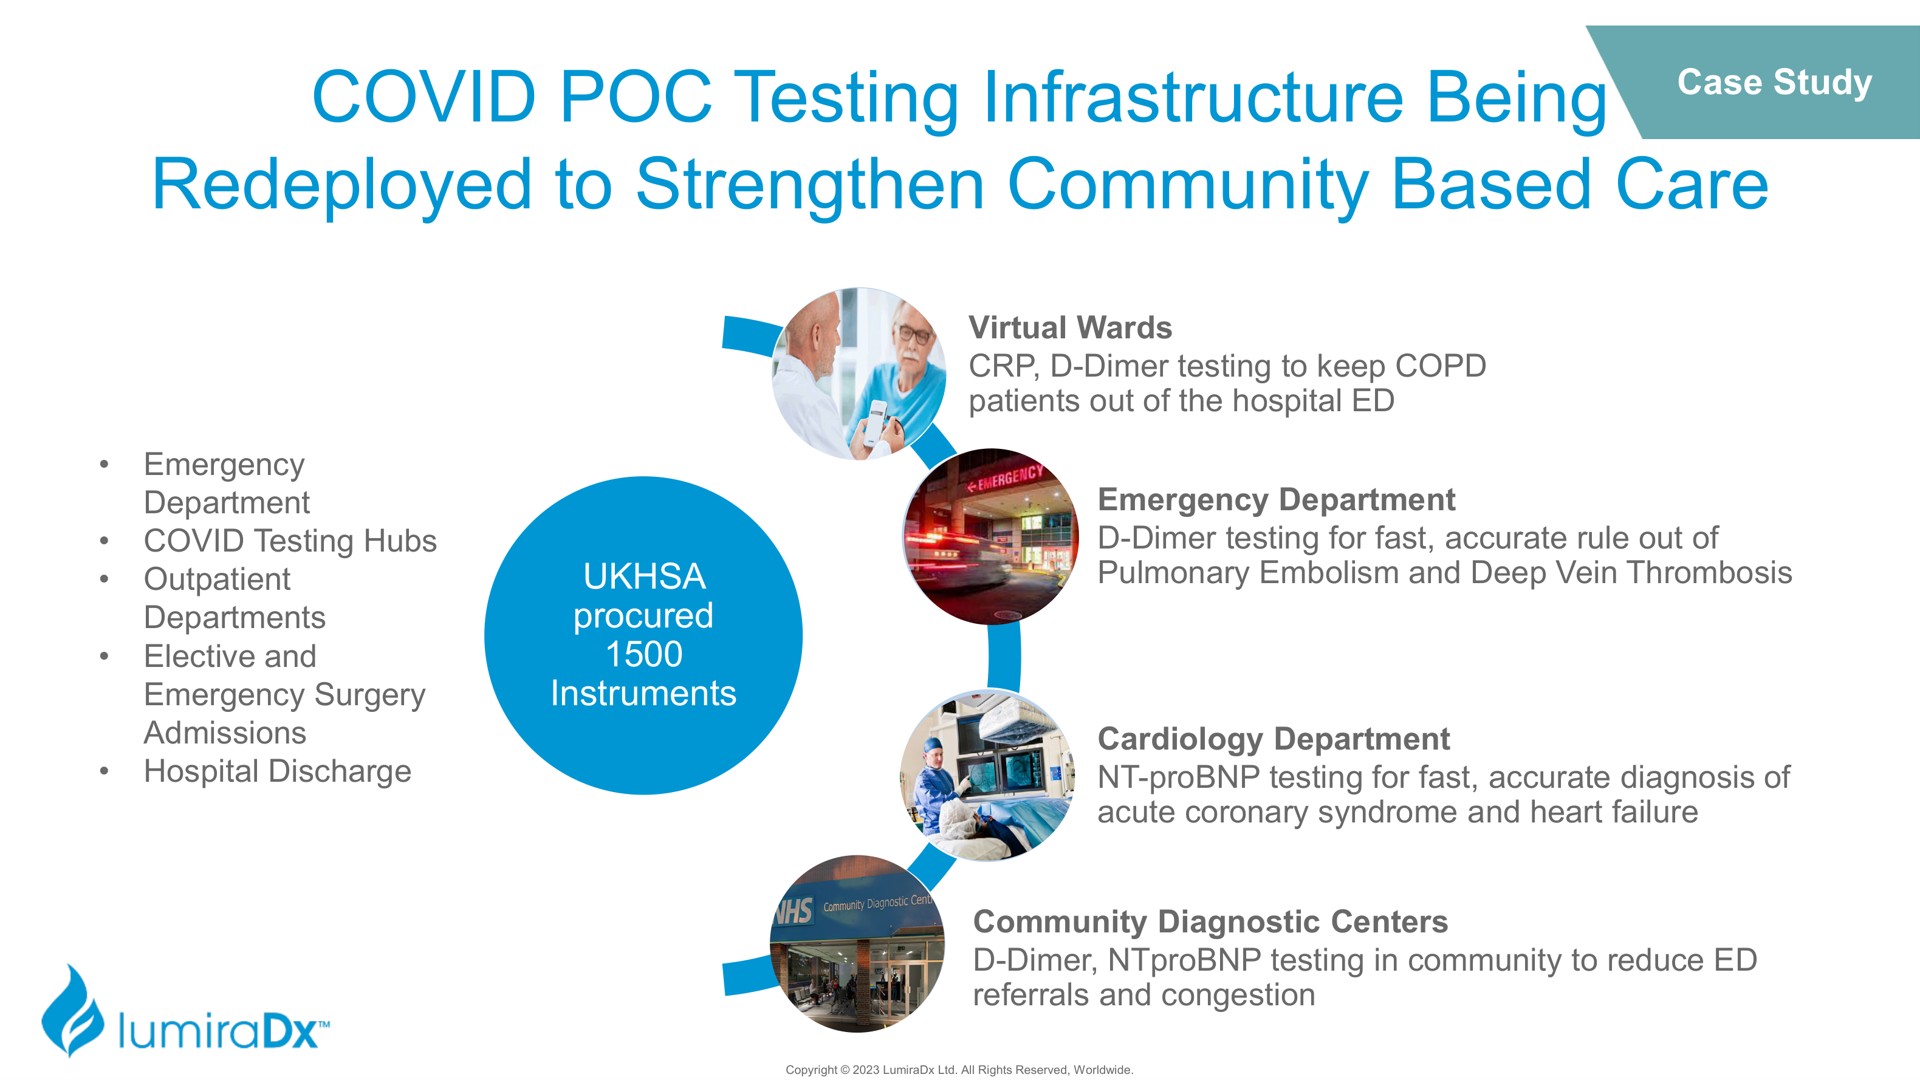 covid testing infrastructure being redeployed to strengthen community based care | LumiraDx